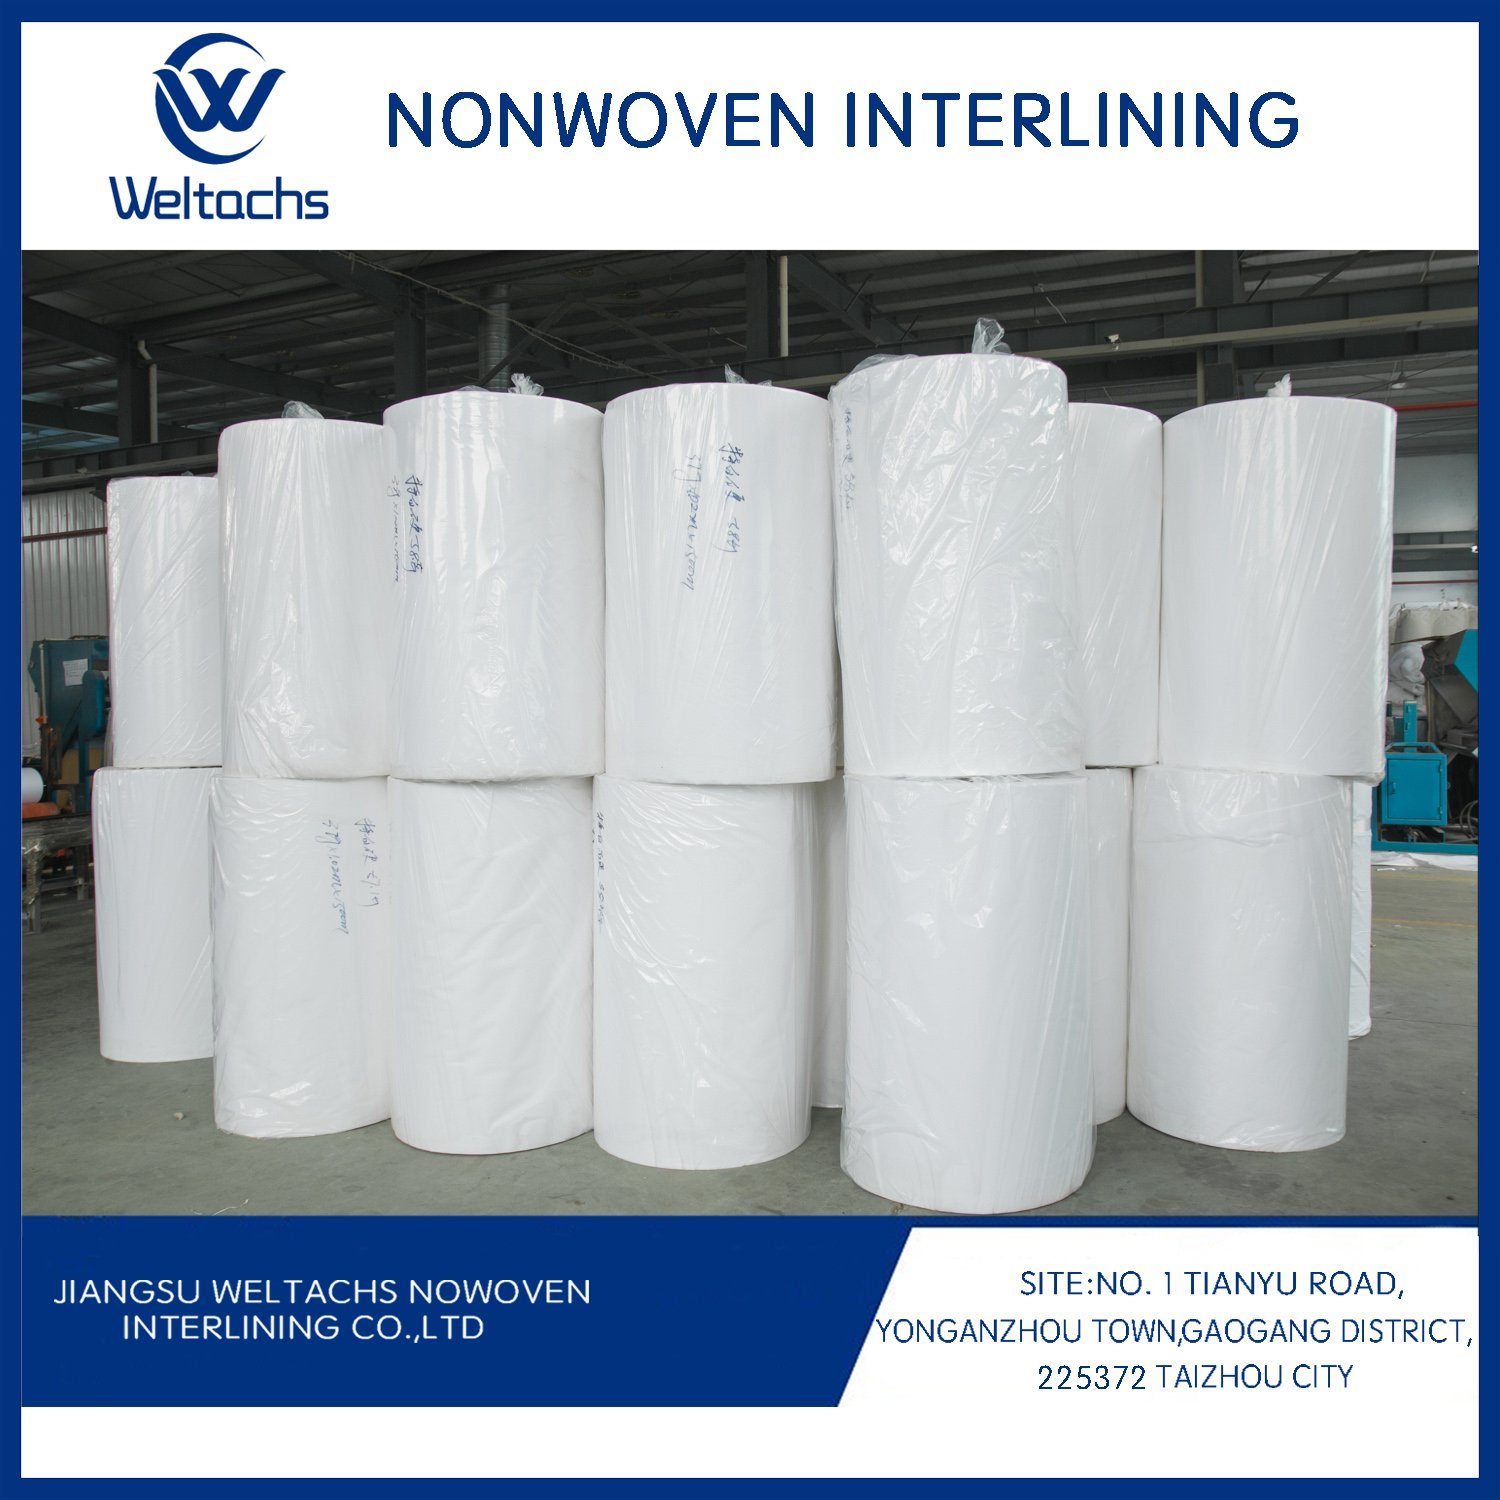 Gum Stay Polyester Interlining Chemical Bond Cut Away Interlining 1035hf Nonwoven Fusible Interlining